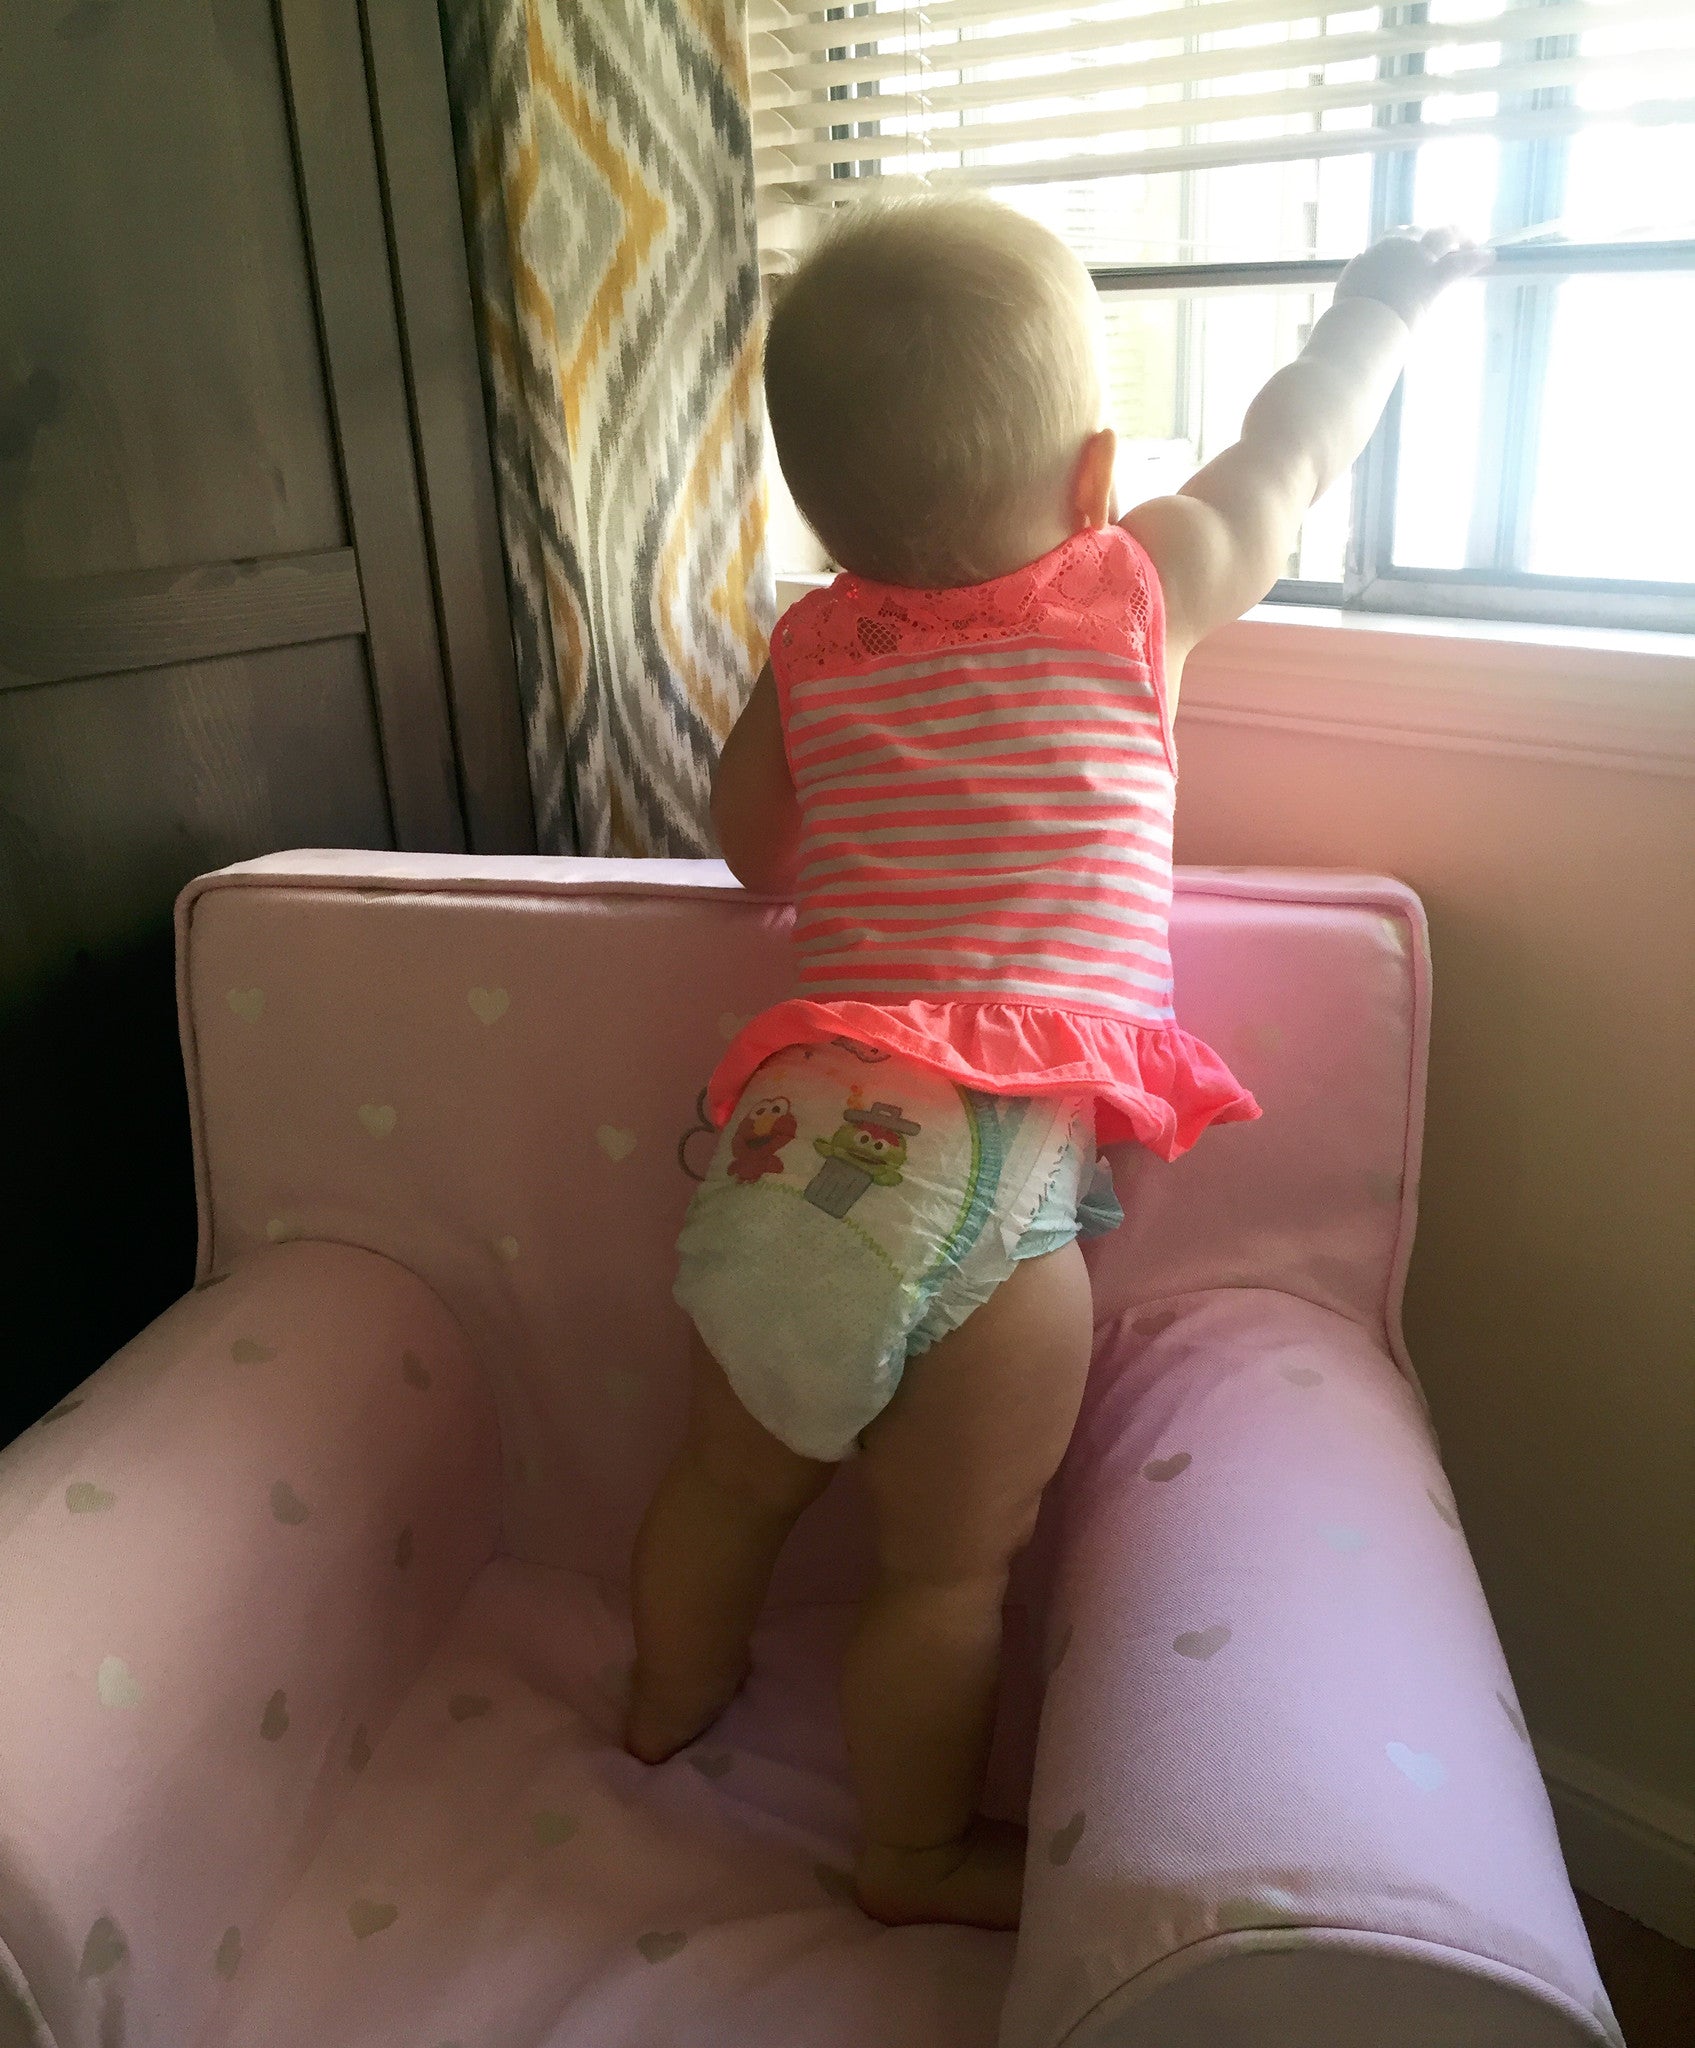 Baby Proofing: The good, the bad and the ugly